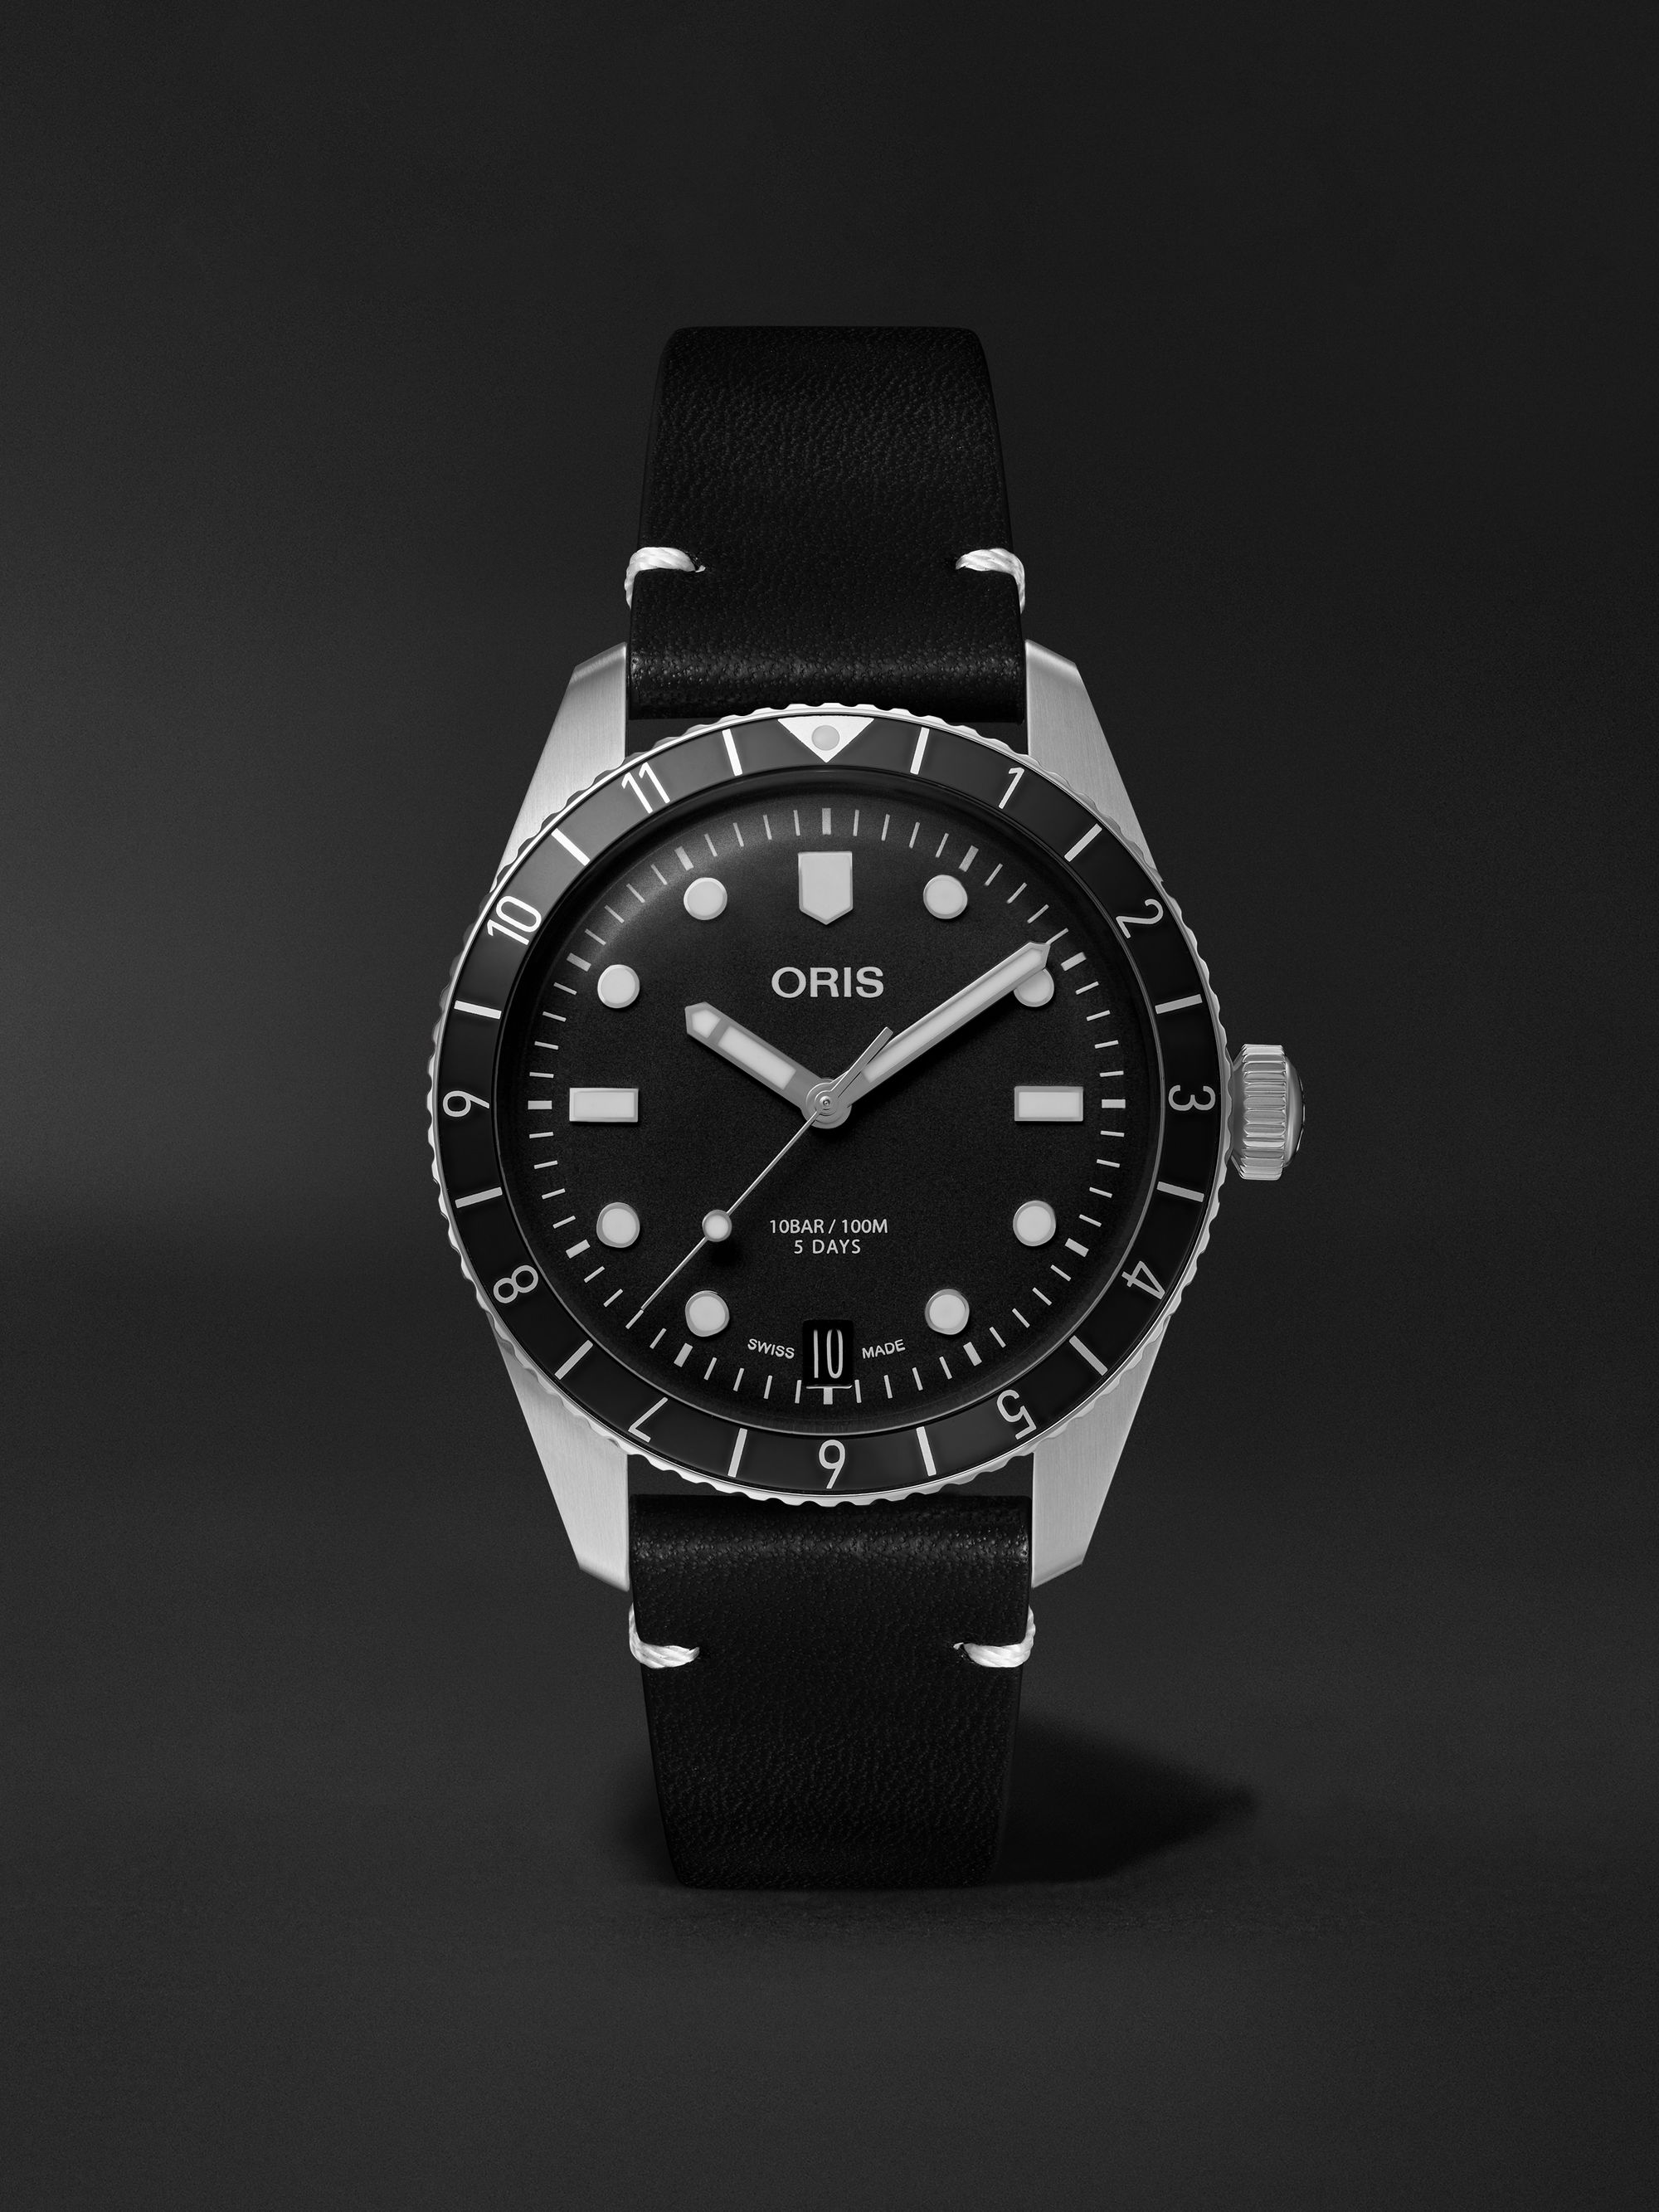 ORIS Divers Sixty-Five Automatic 40mm Stainless Steel and Leather Watch,  Ref. No. 01 400 7772 4054-07 5 20 82 | MR PORTER